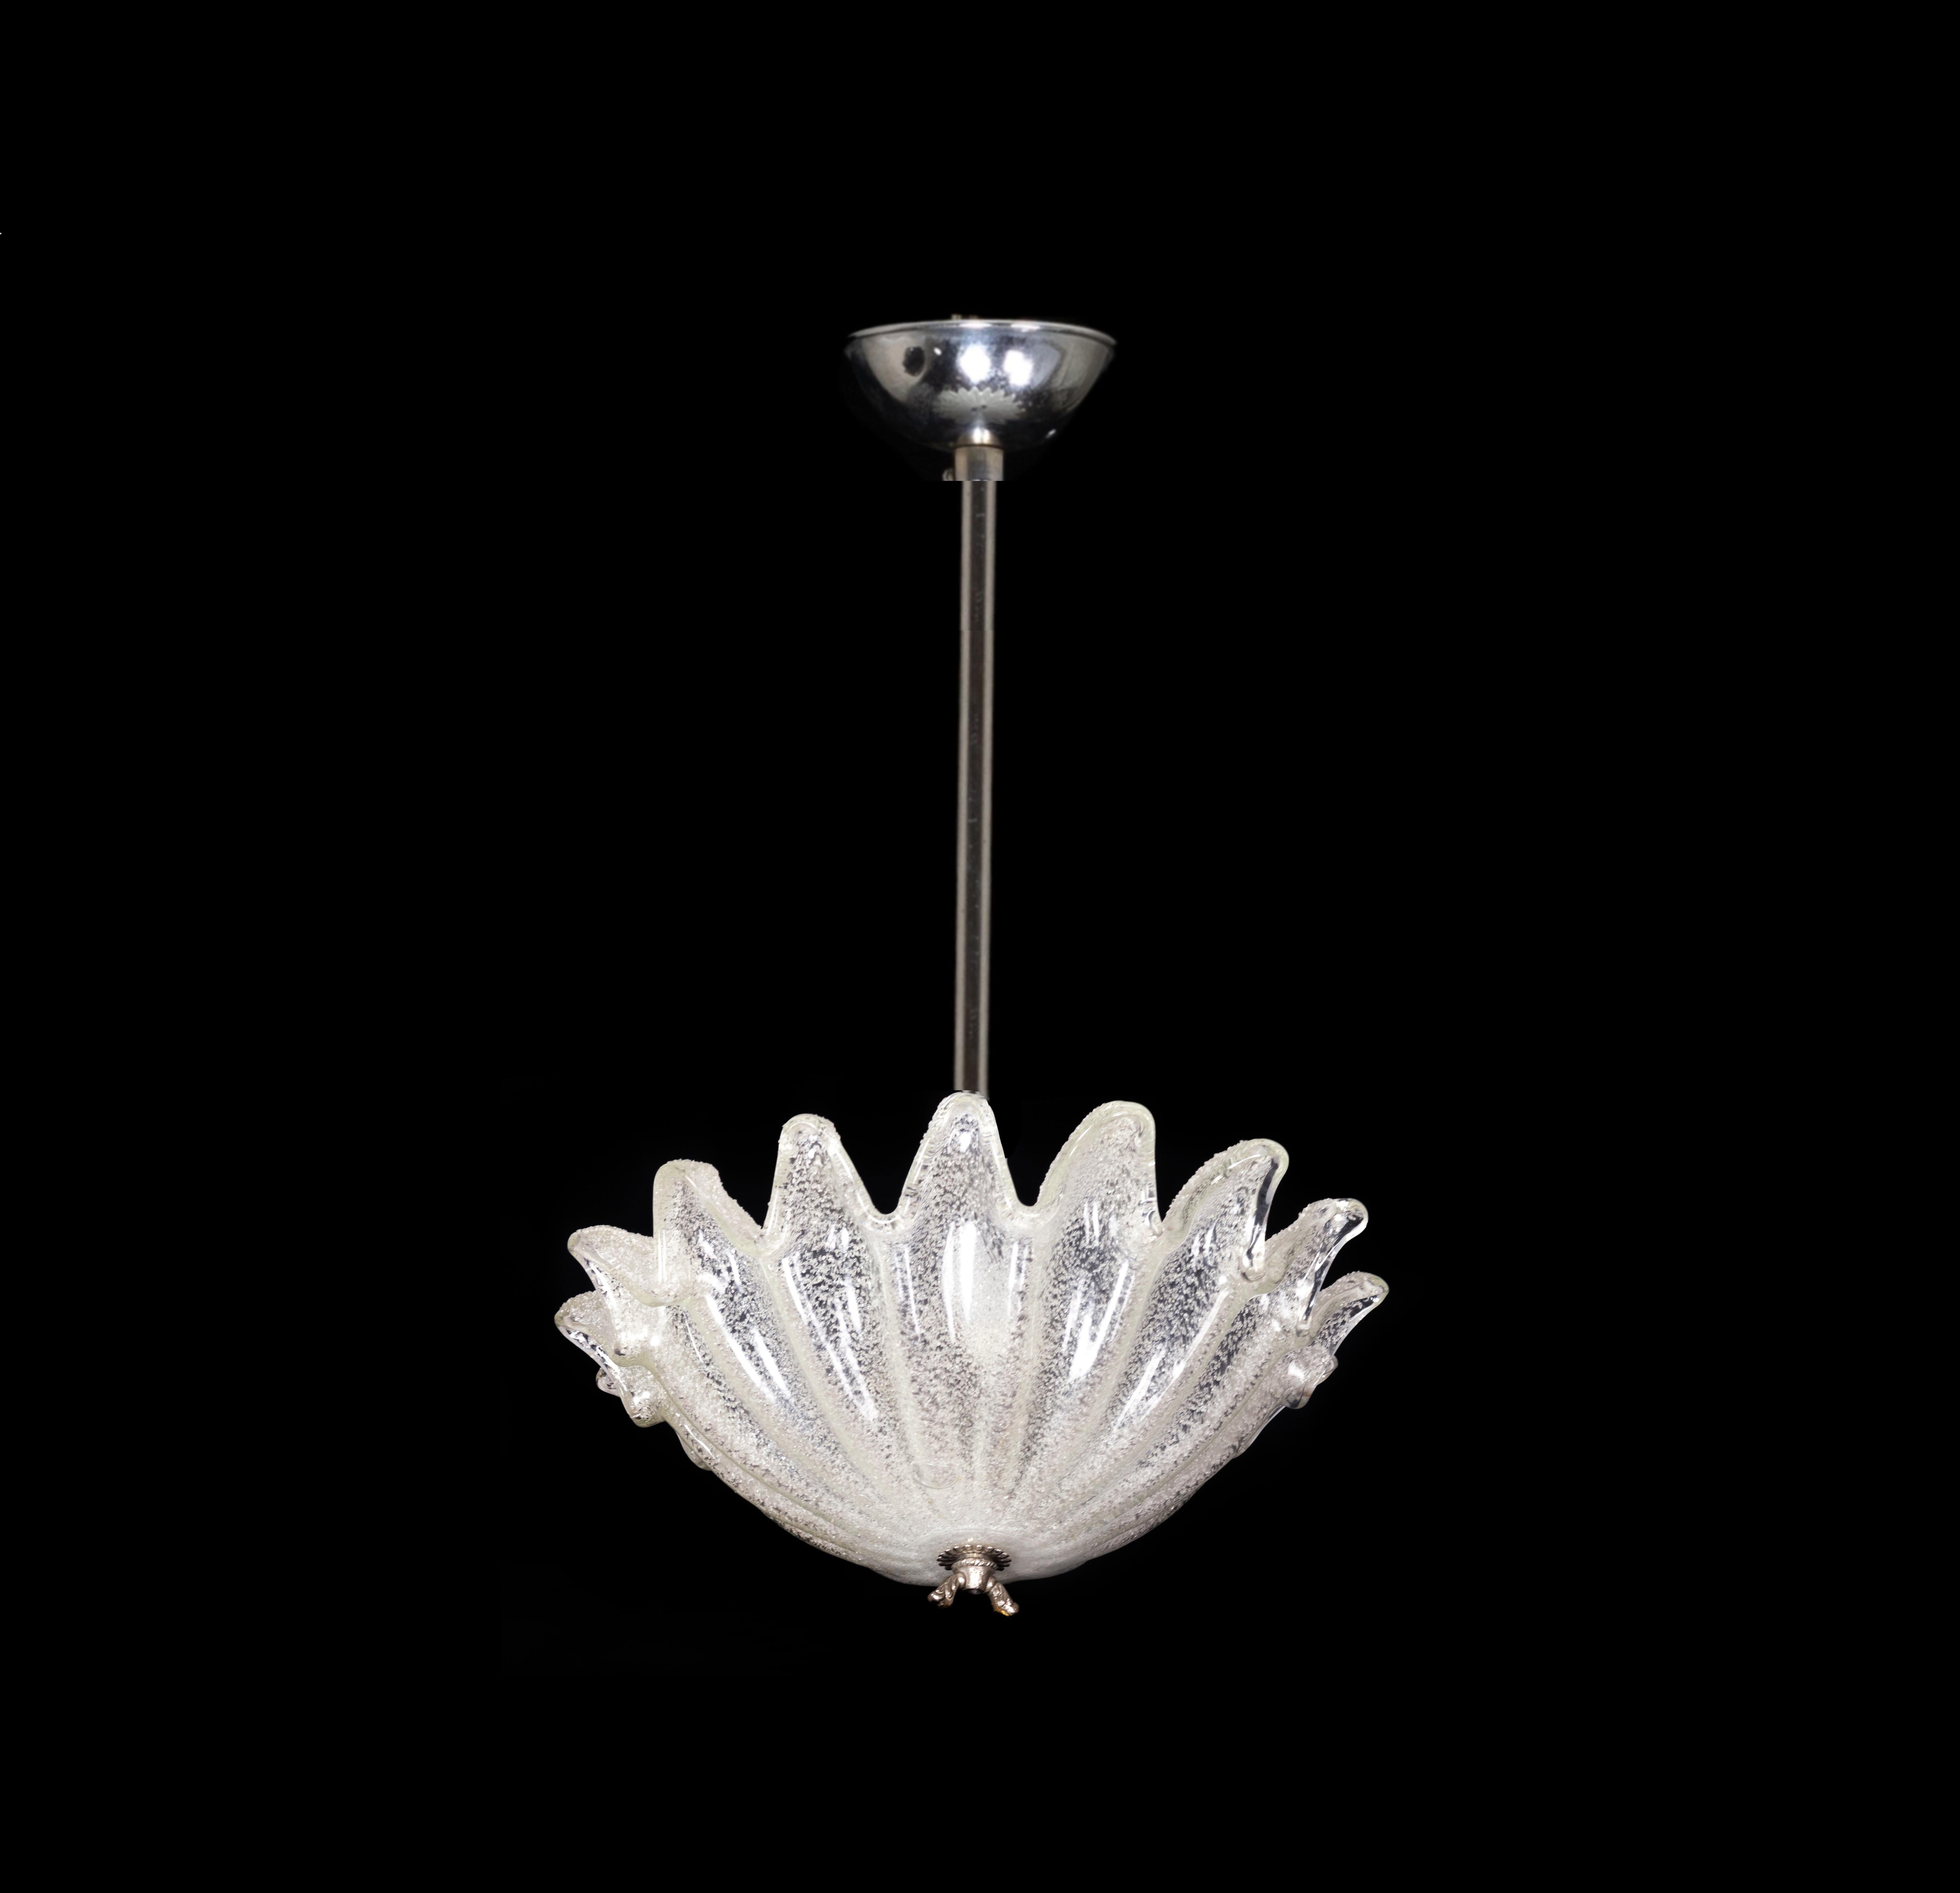 A chandelier with a  translucent Murano style glass with canopy,  stylized leaf dome with a a central light and a chromed stem.
Reviewed recently and in working conditions.  
Dimensions: Height 55 cm diameter 40 cm

The chandelier is currently wired